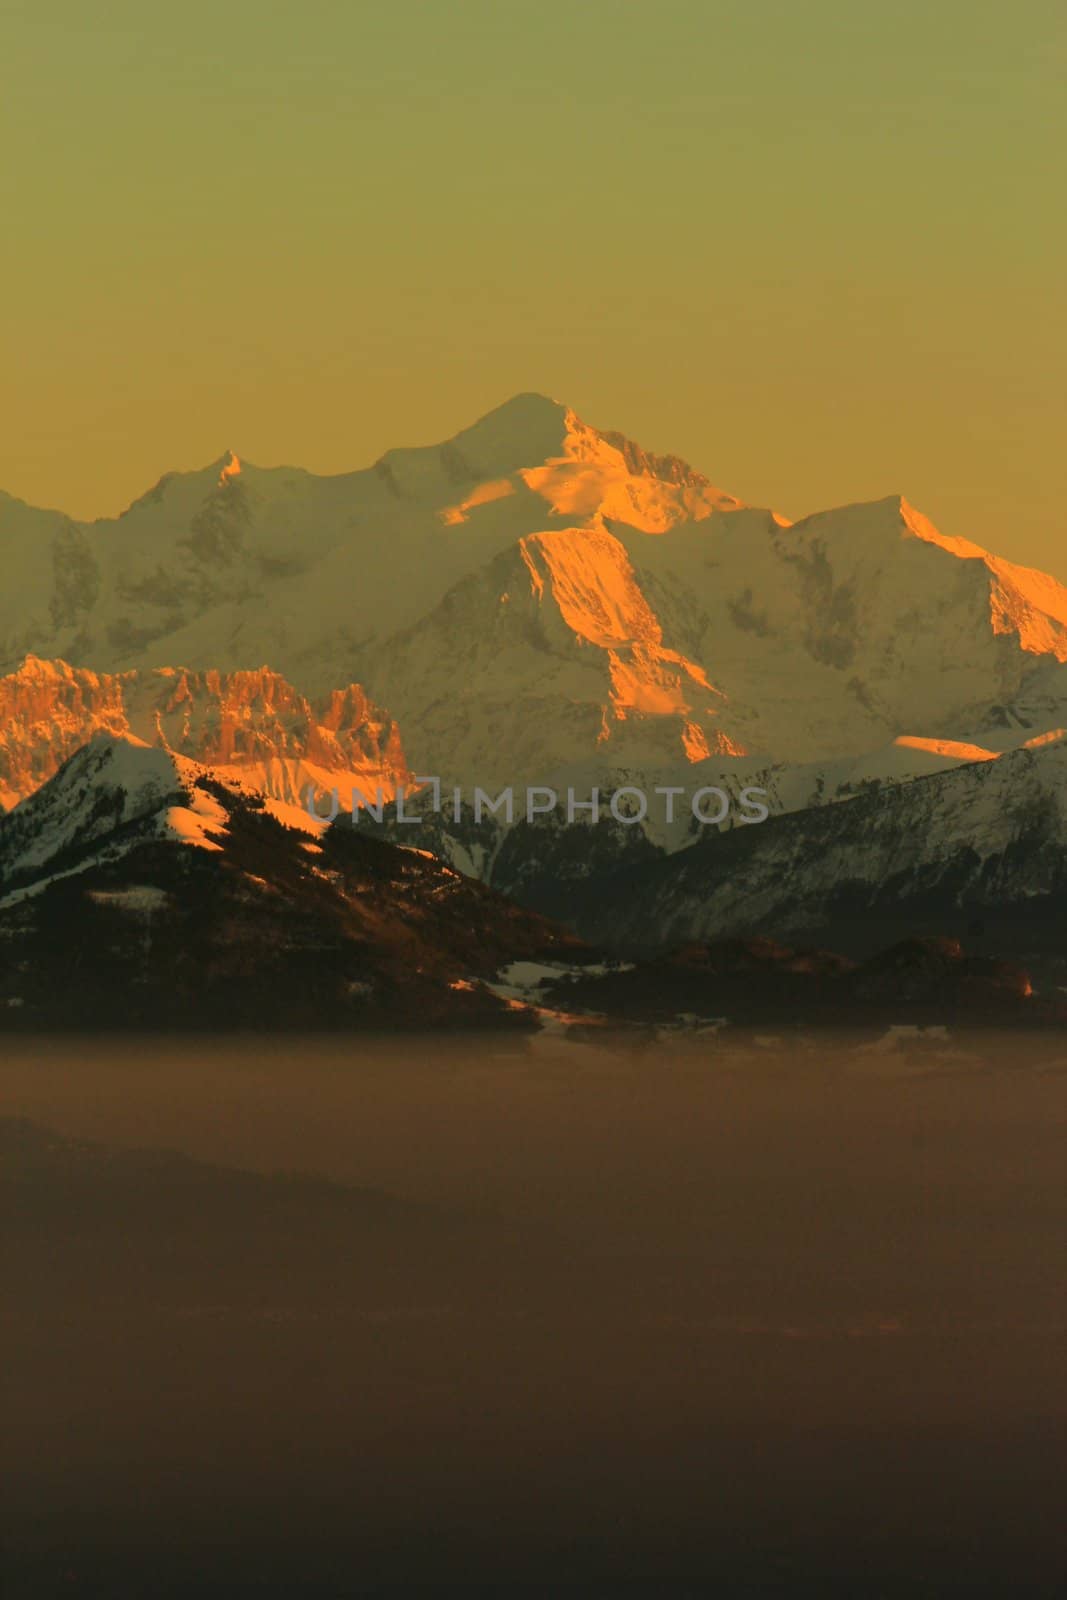 Mont-Blanc, Alps, by sunset by Elenaphotos21